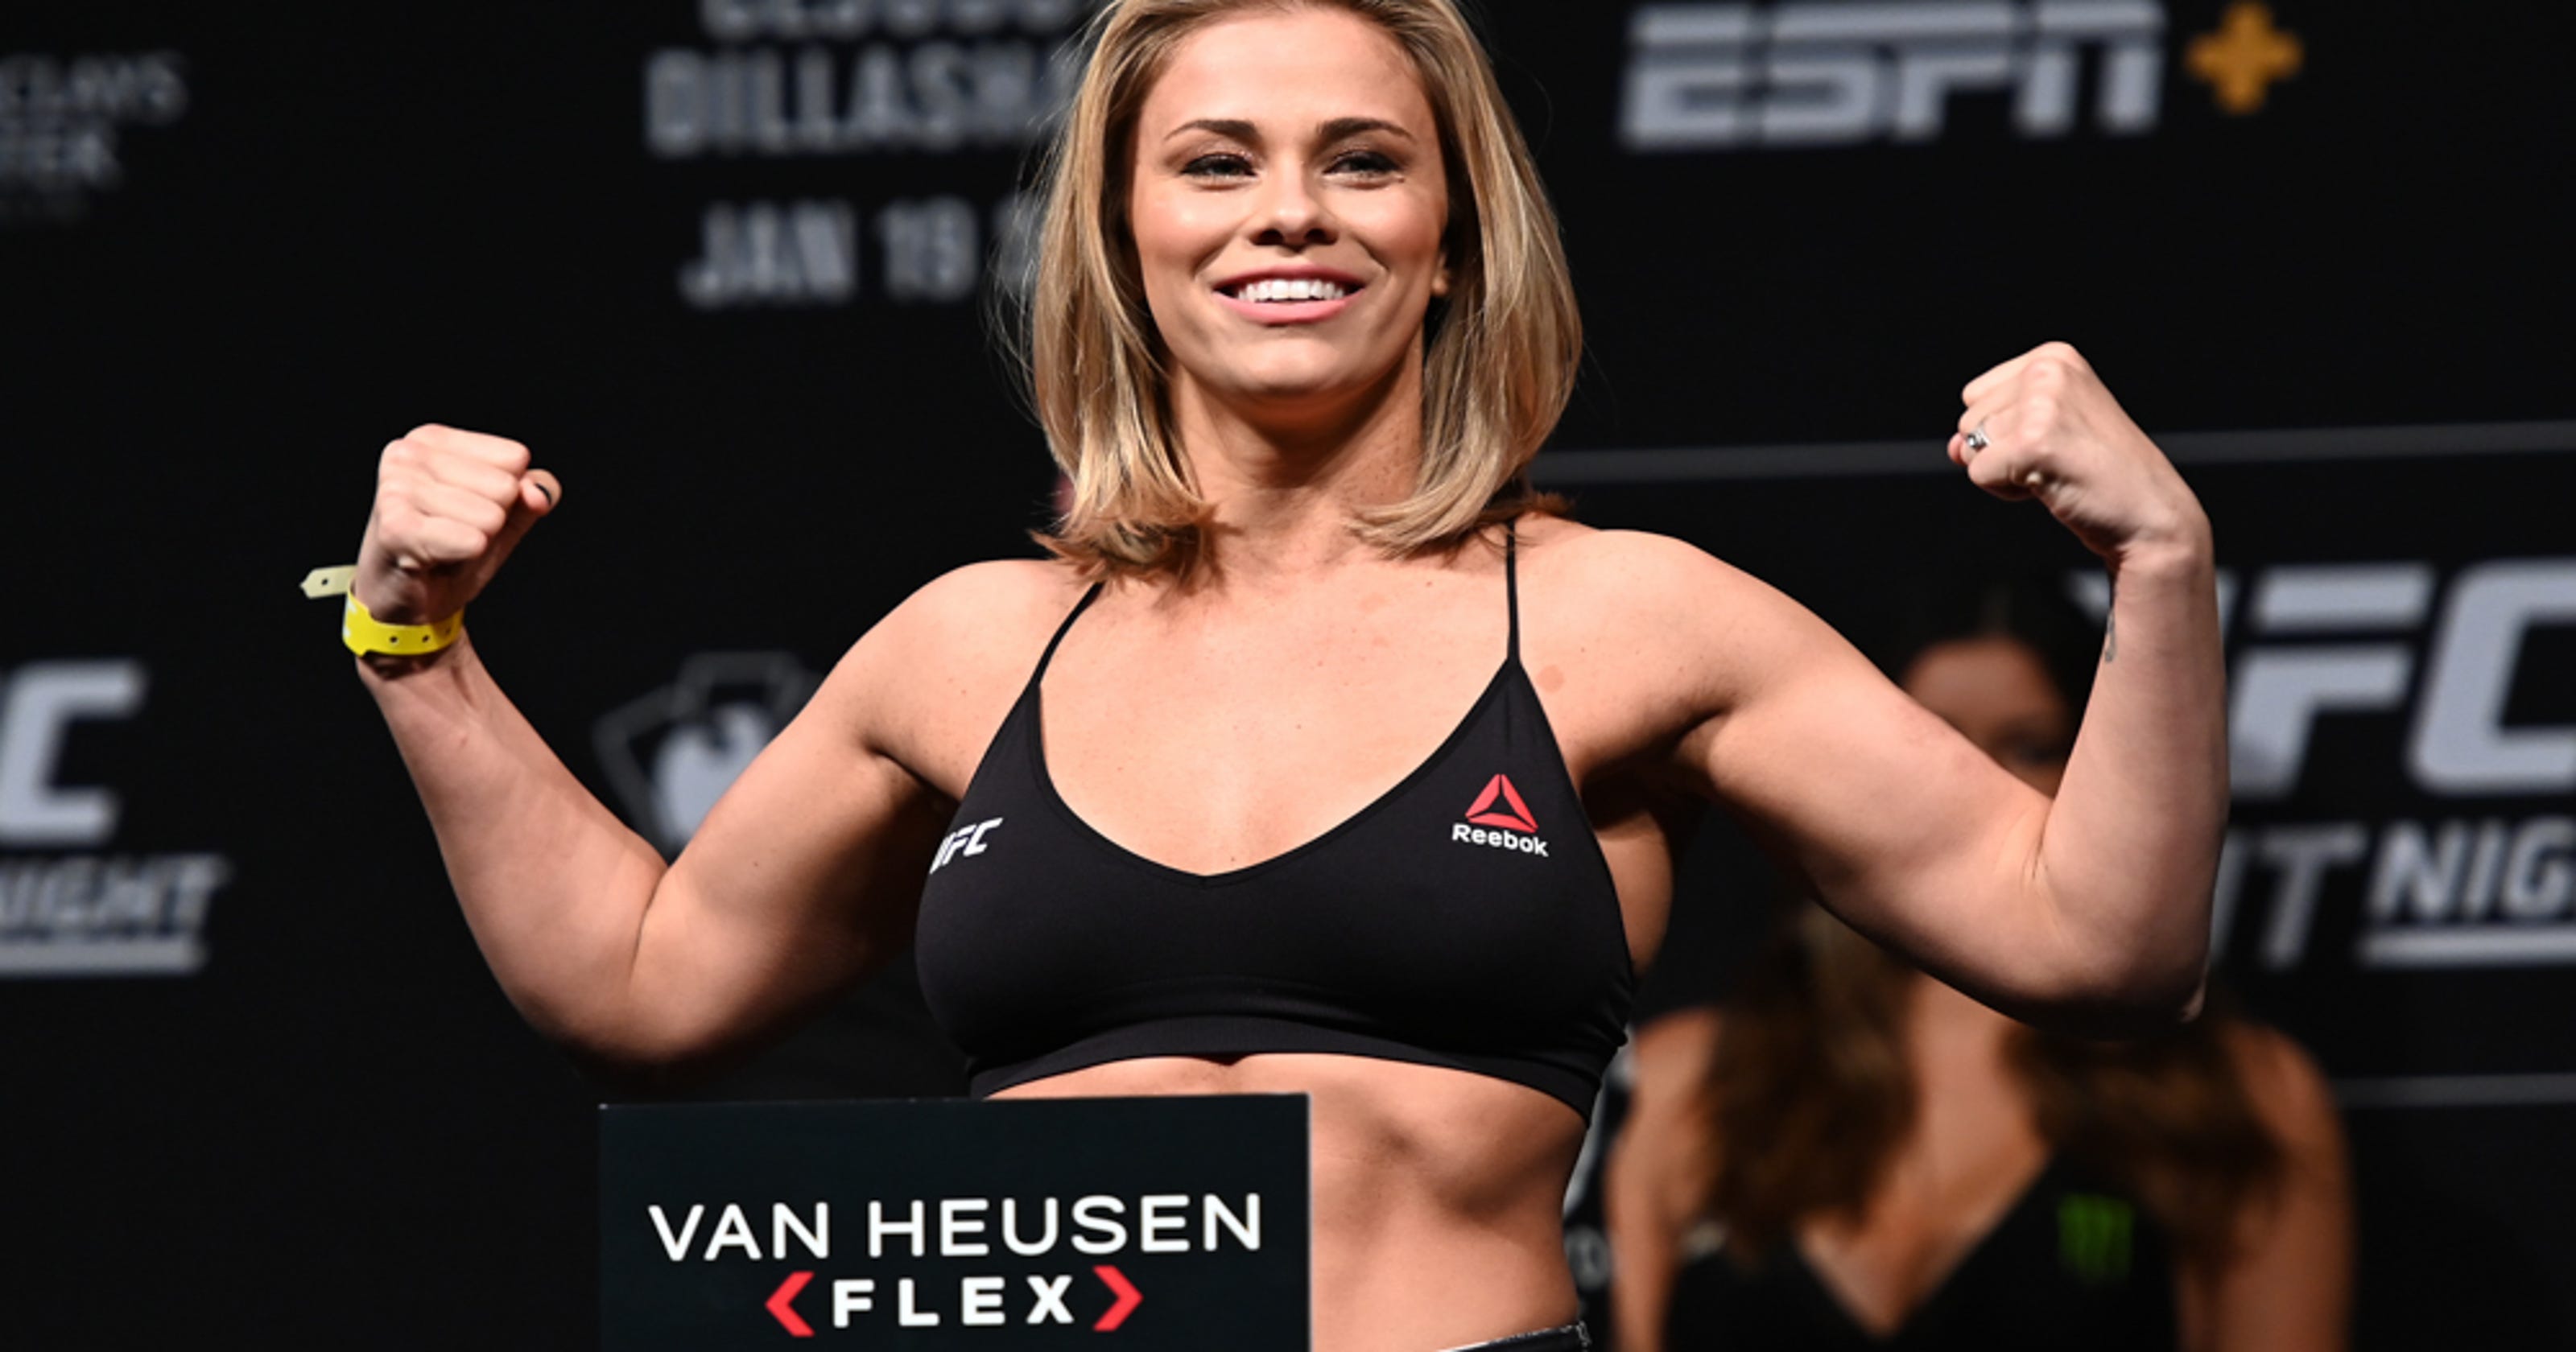 Sports Illustrated Swimsuit Issue Ufcs Paige Vanzant To Be Featured